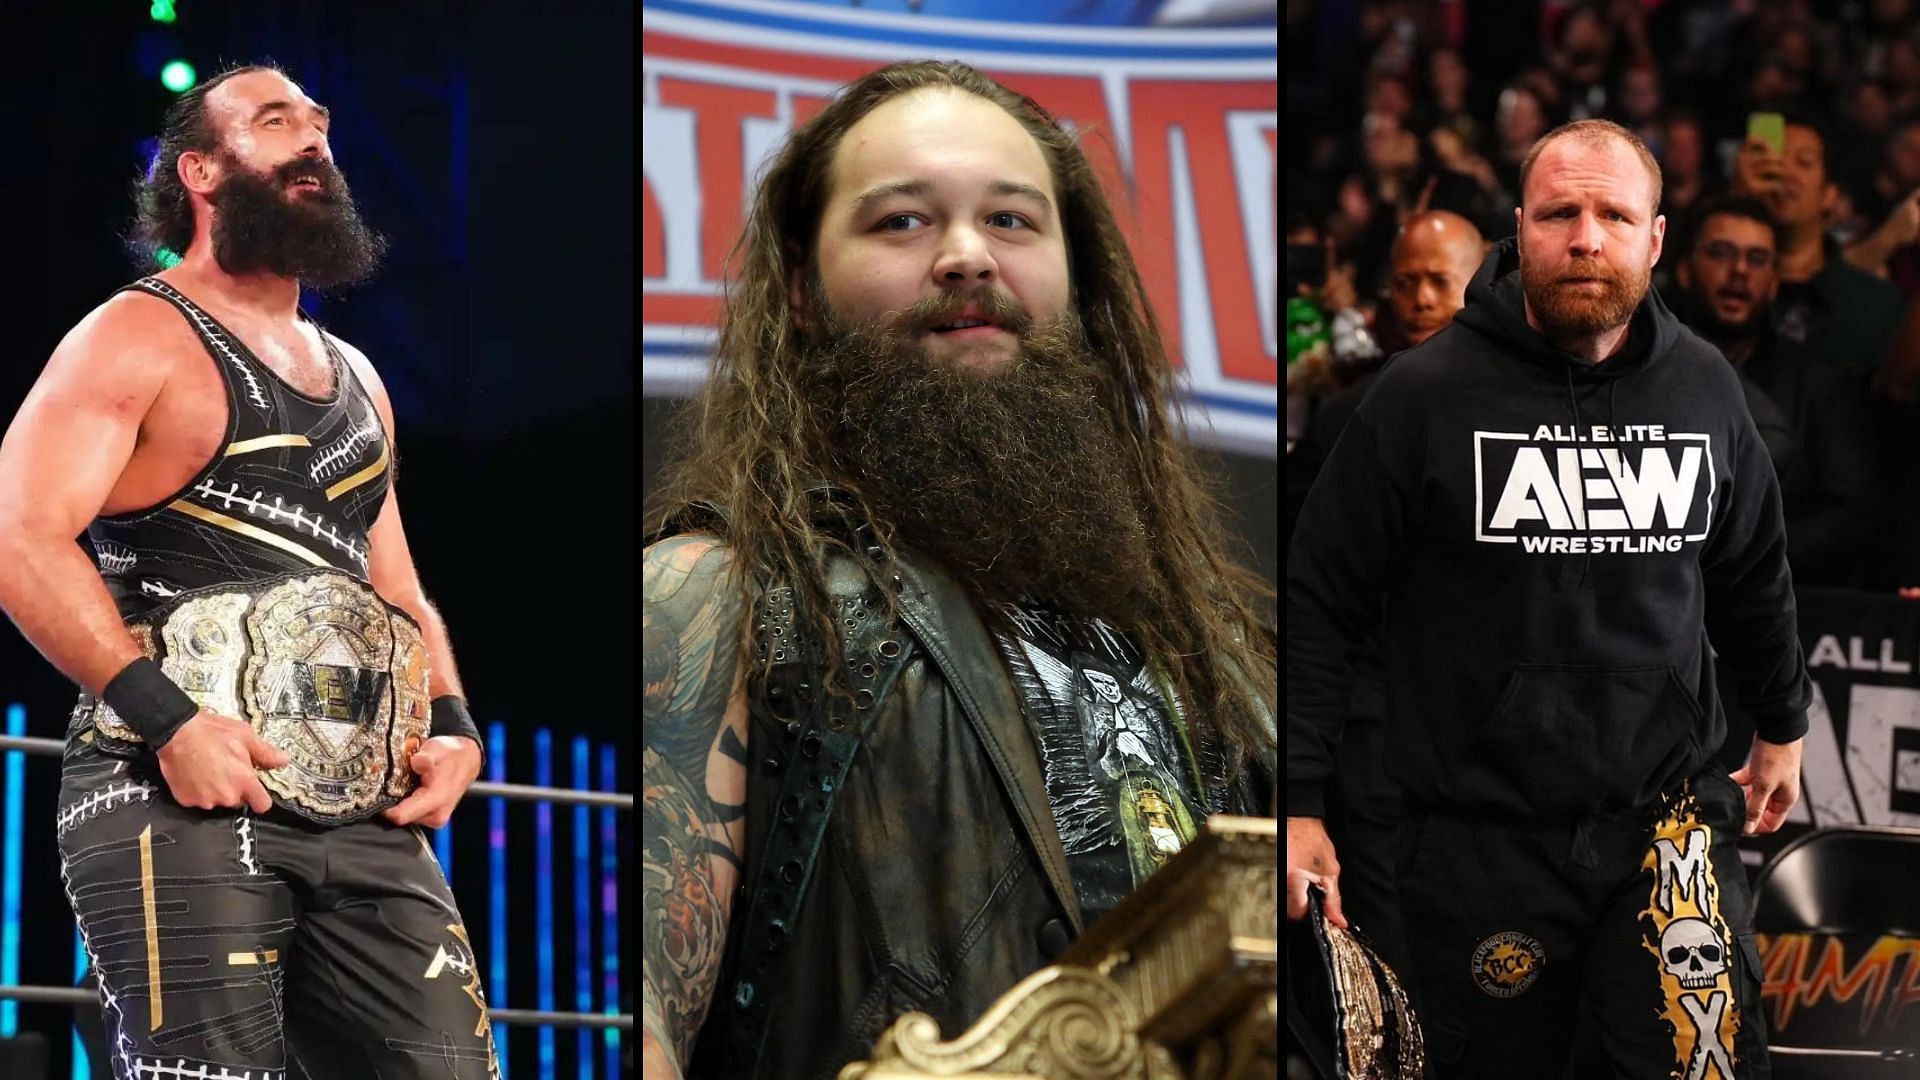 Brodie Lee (left) and Jon Moxley (right) got to work with Bray Wyatt (center) in WWE in the past